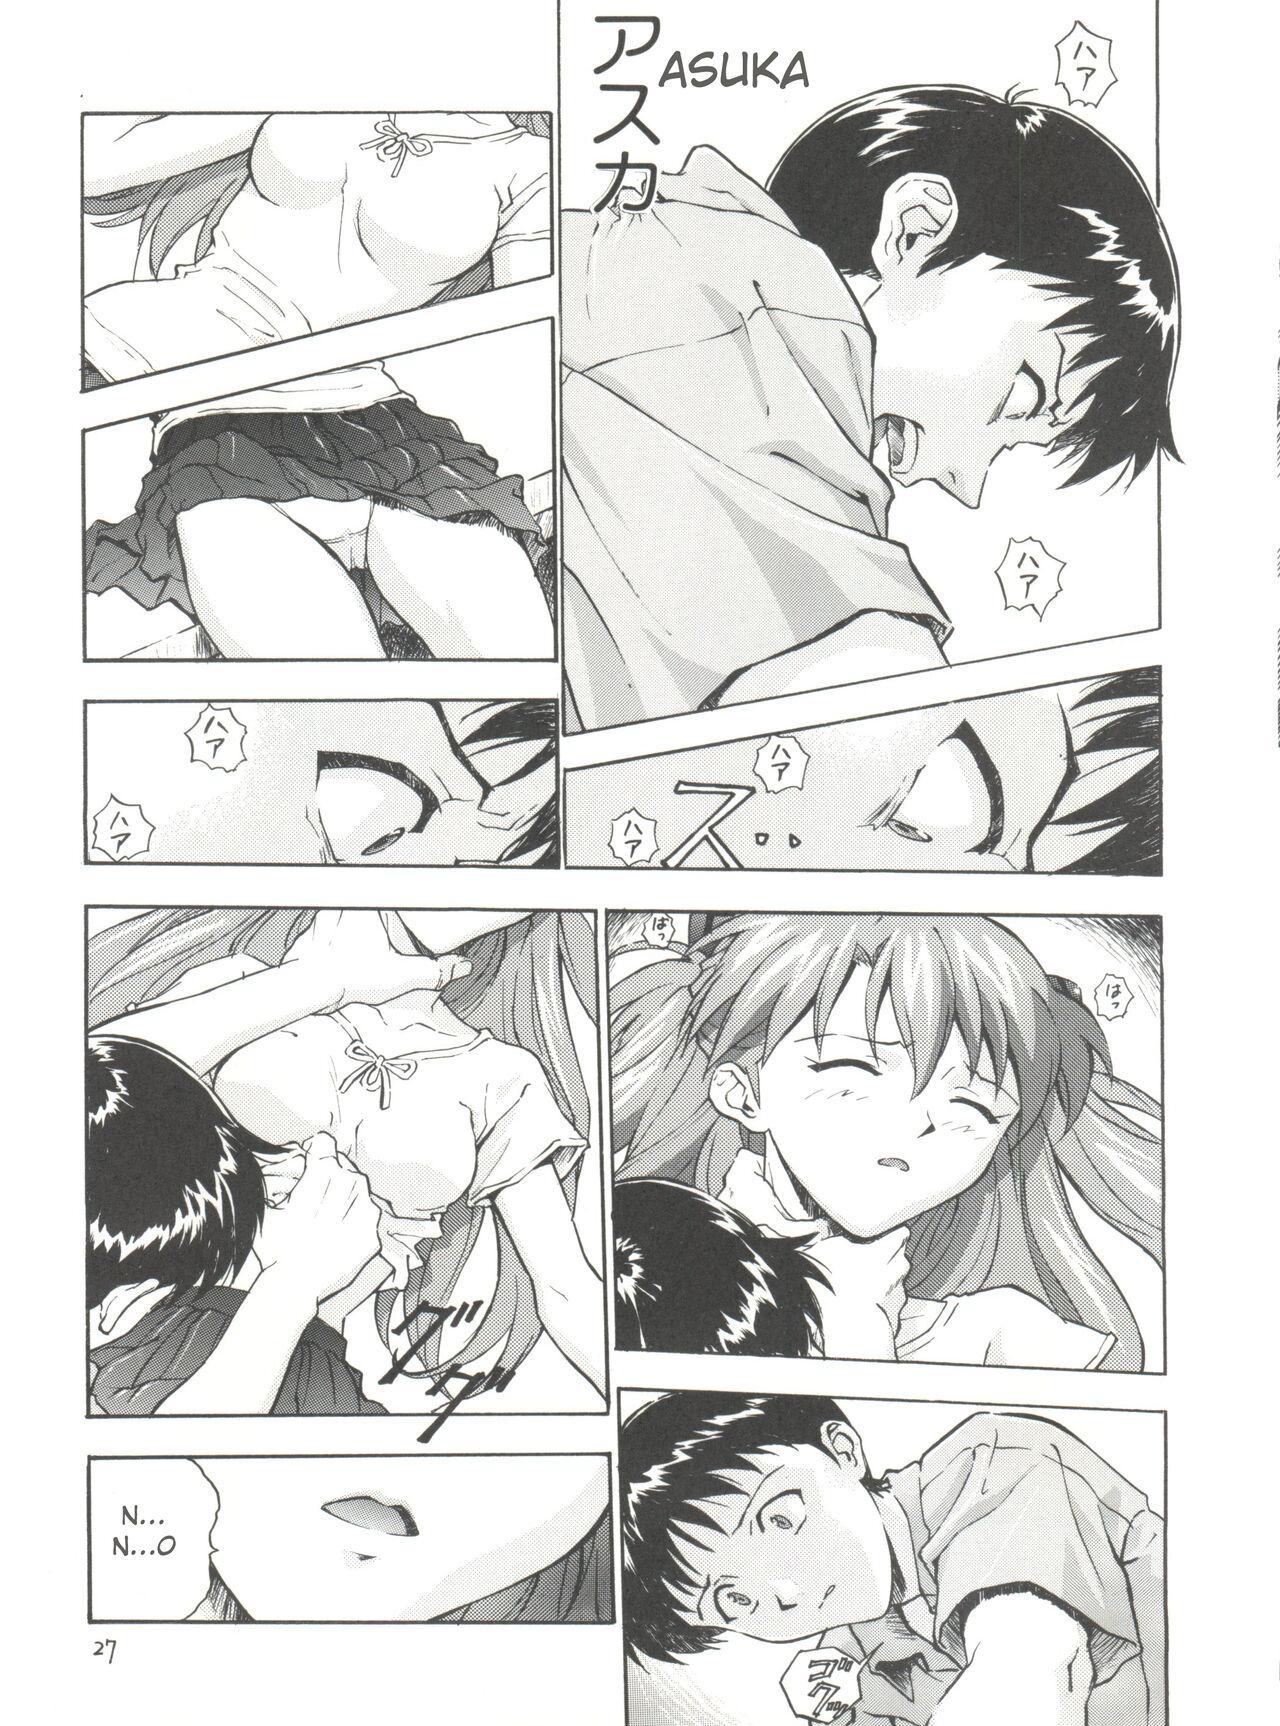 Pack A Gou - Neon genesis evangelion Wives - Page 9